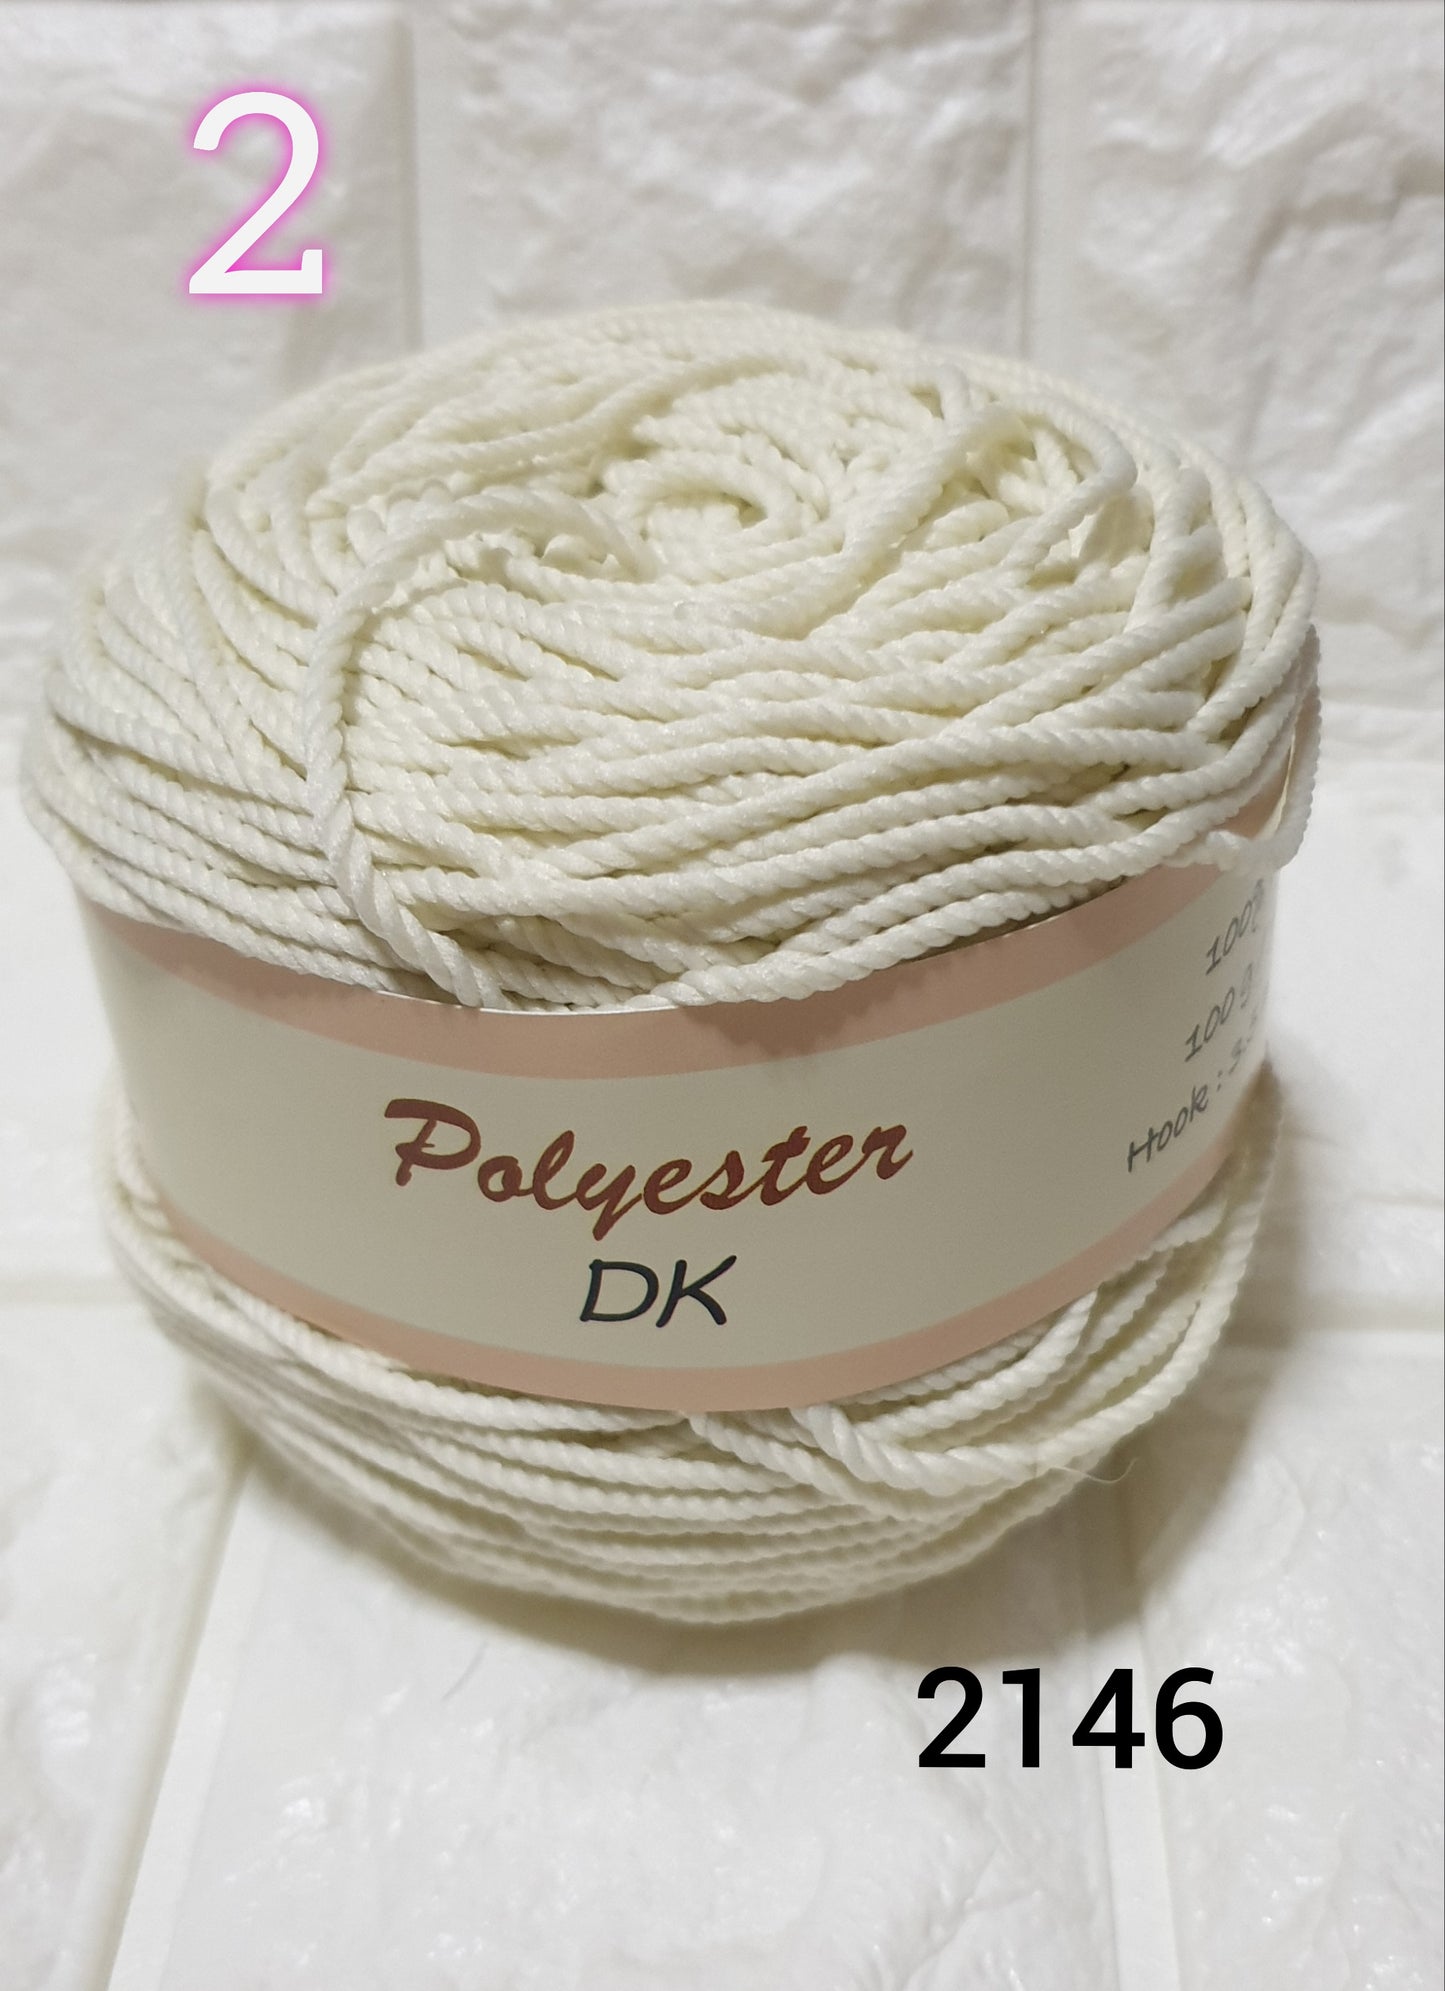 Polyester DK/Thick Ply Yarn 100g